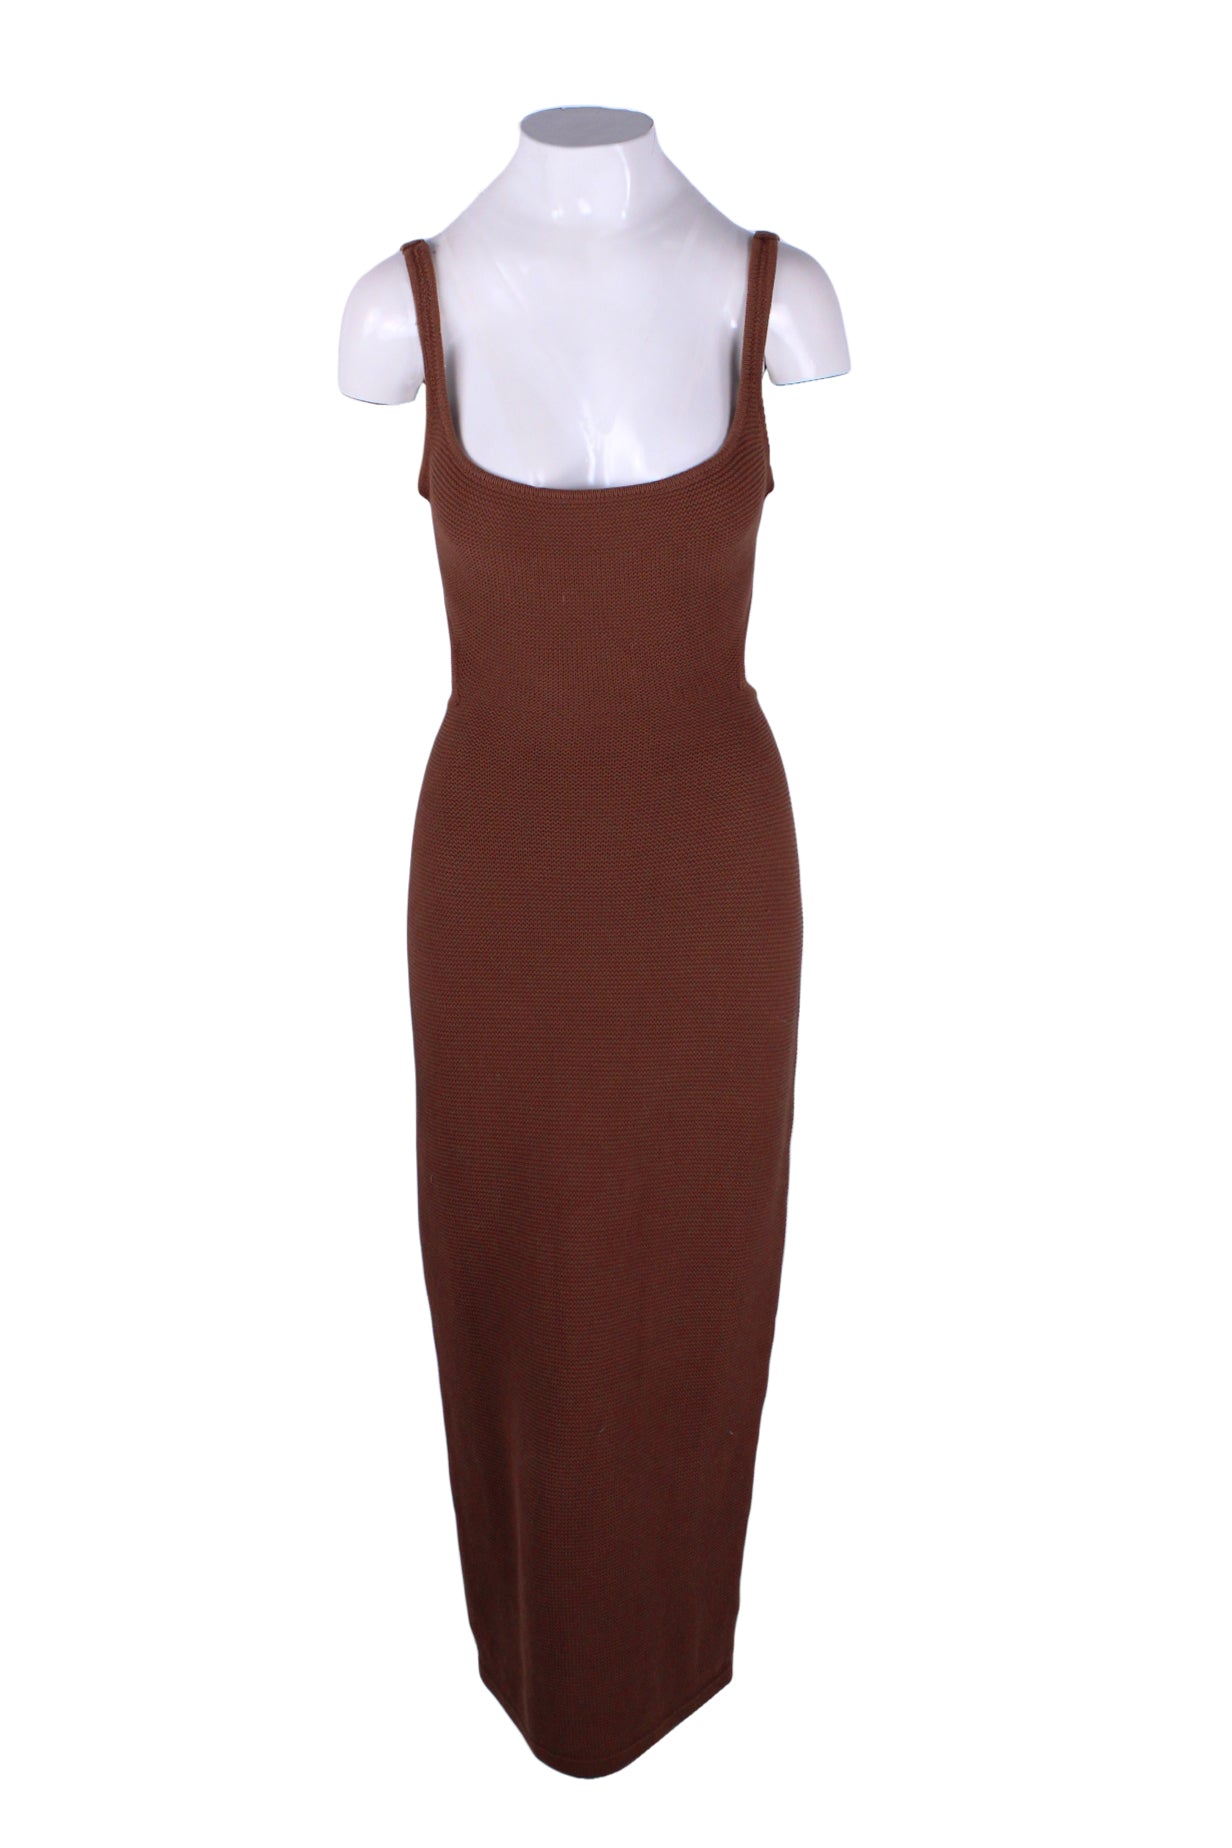 description: sabo brown knit midi dress. features backless silhouette, scoop neckline, and tie detail at waist. 